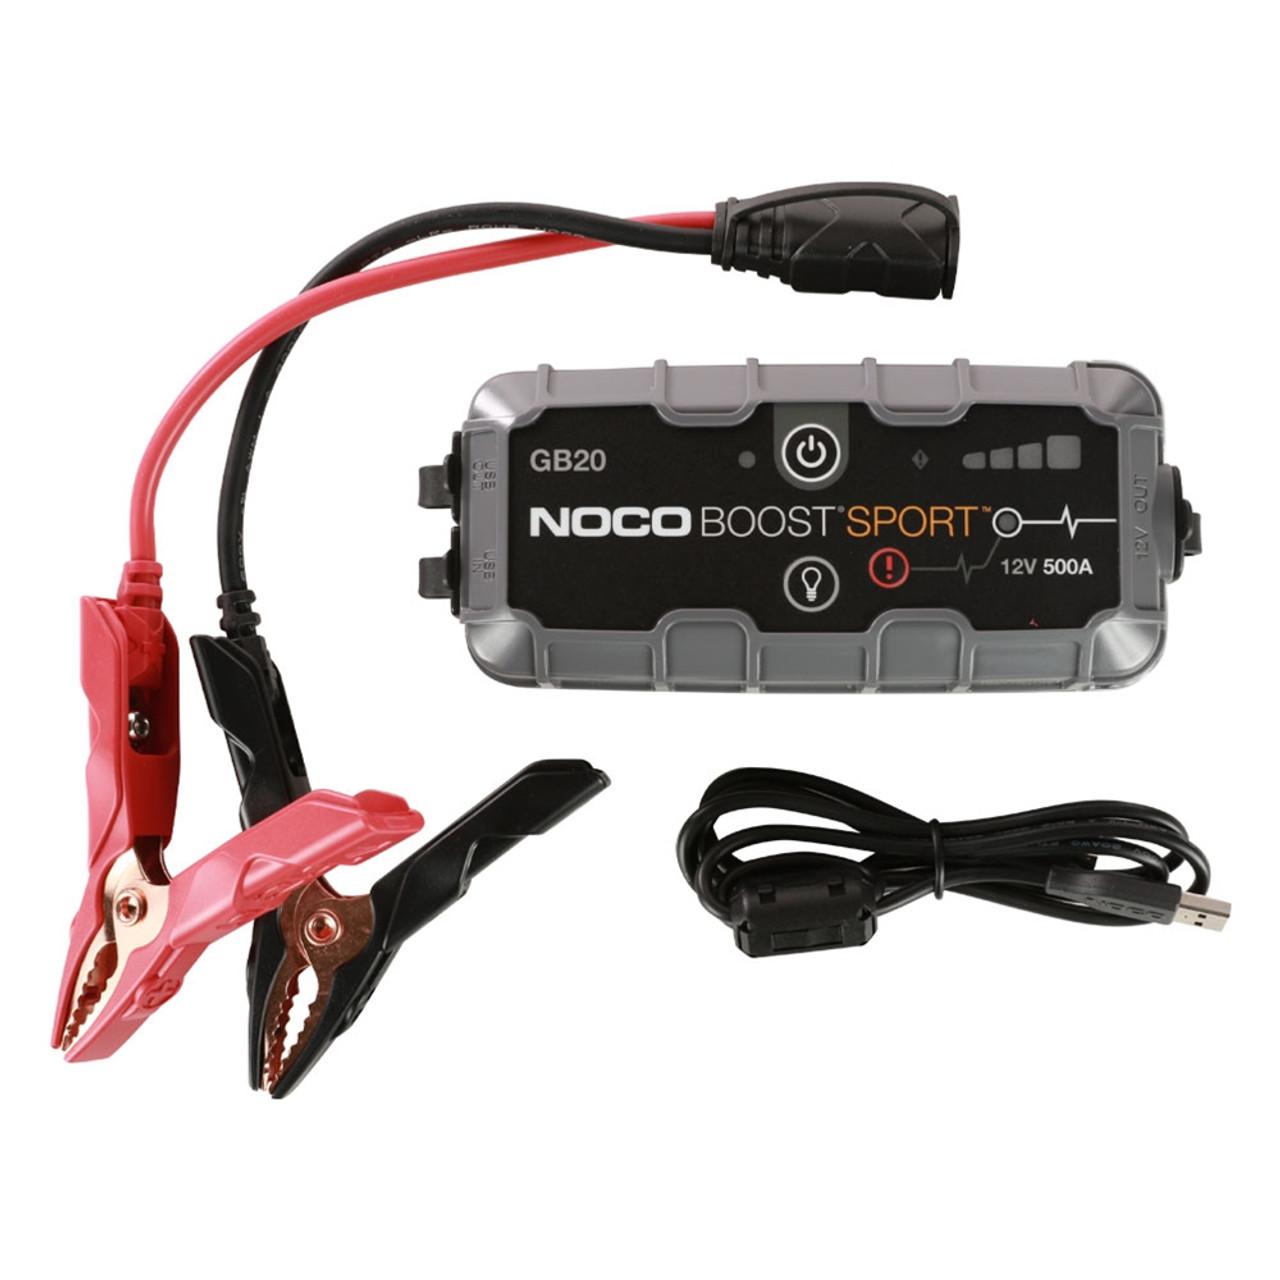 NOCO Boost Sport GB20 500 Amp 12-Volt UltraSafe Lithium Jump Starter Box,  Car Battery Booster Pack, Portable Power Bank Charger, and Jumper Cables  for